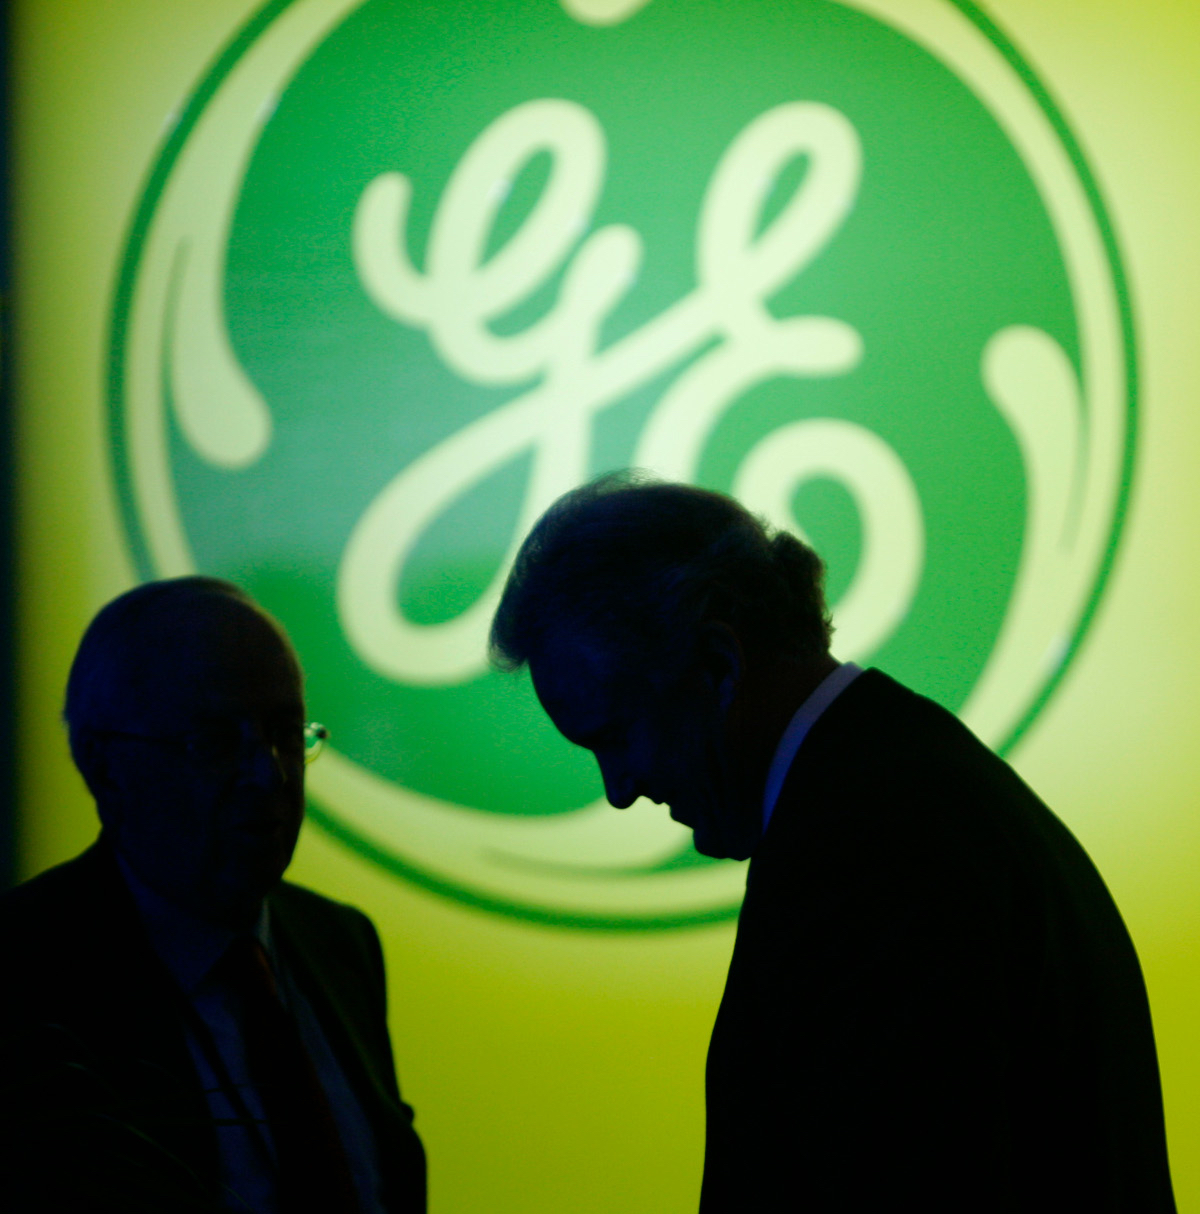 General Electric Co. CEO Jeff Immelt waits for the start of the annual shareholders meeting, Wednesday, April 23, 2008, in Erie, Pa. Immelt is telling shareholders that the economy is the toughest it's been since 2001 and that the U.S. is facing the worst housing crisis since the Great Depression.(AP Photo/Tony Dejak)